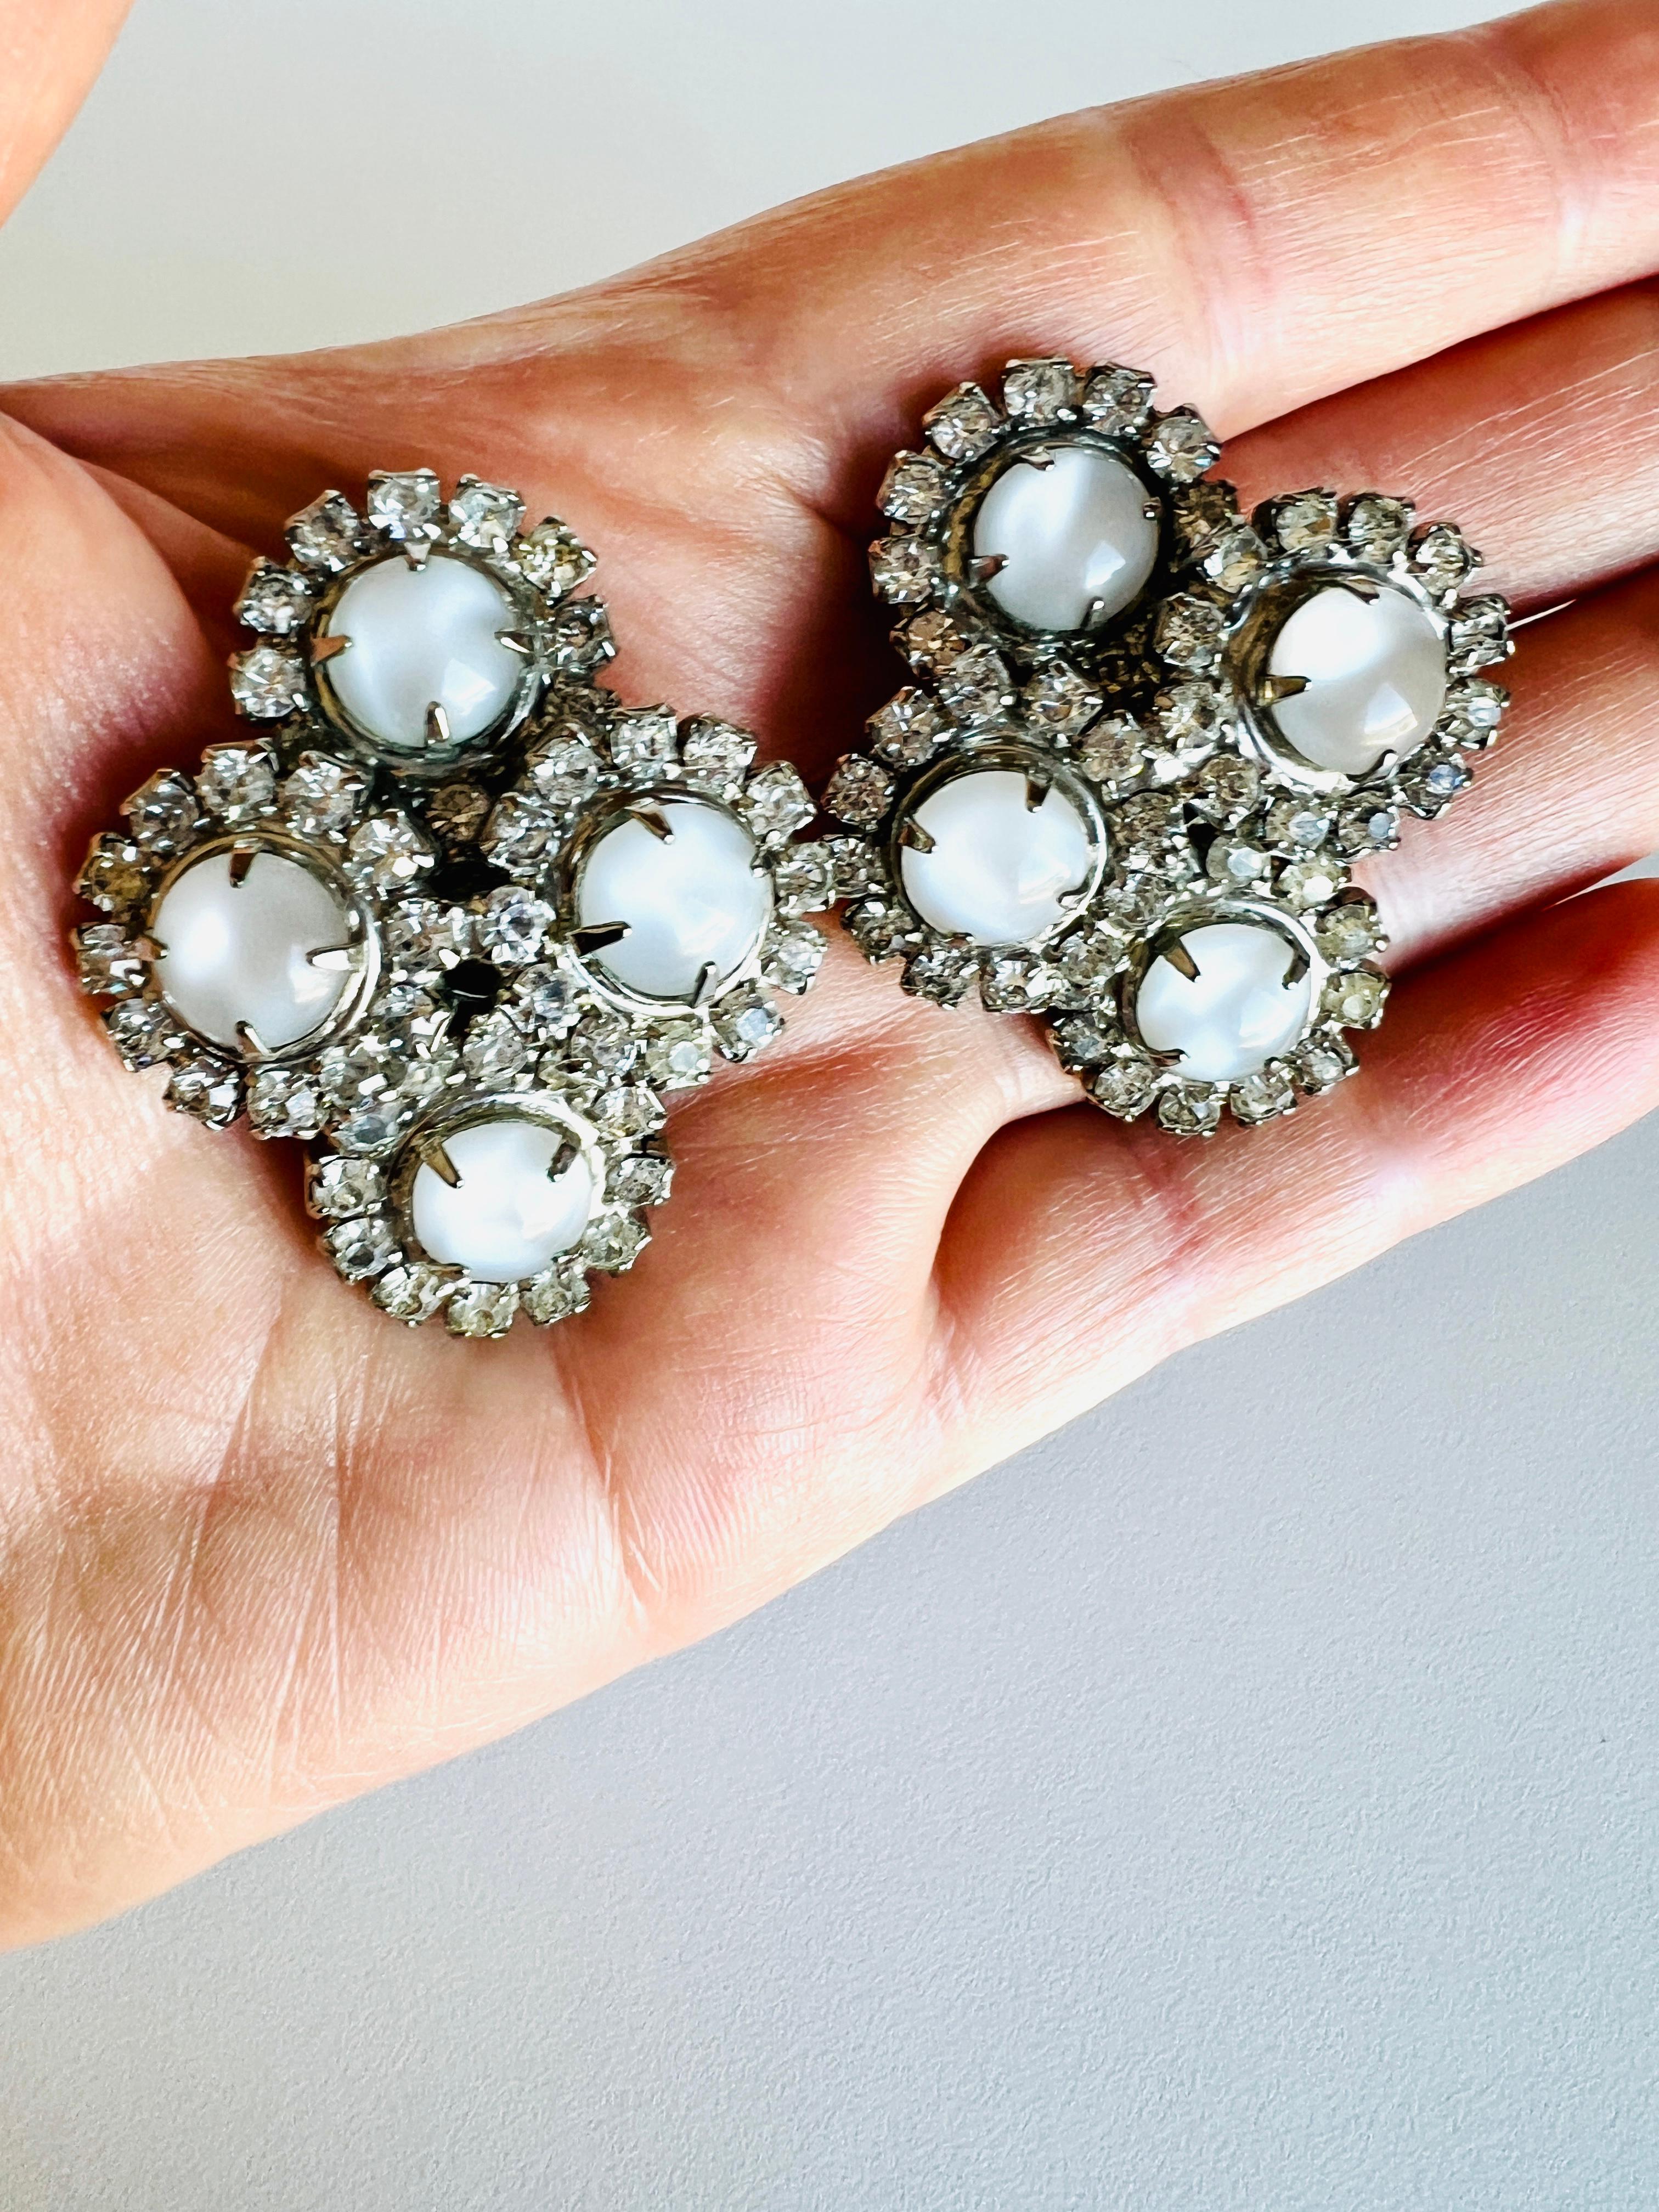 These lovely vintage earrings are well-constructed and quite large. They feature prong-set rhinestones and imitation moonstone glass cabochons set in silver plated metal. 

Size:  1-5/8